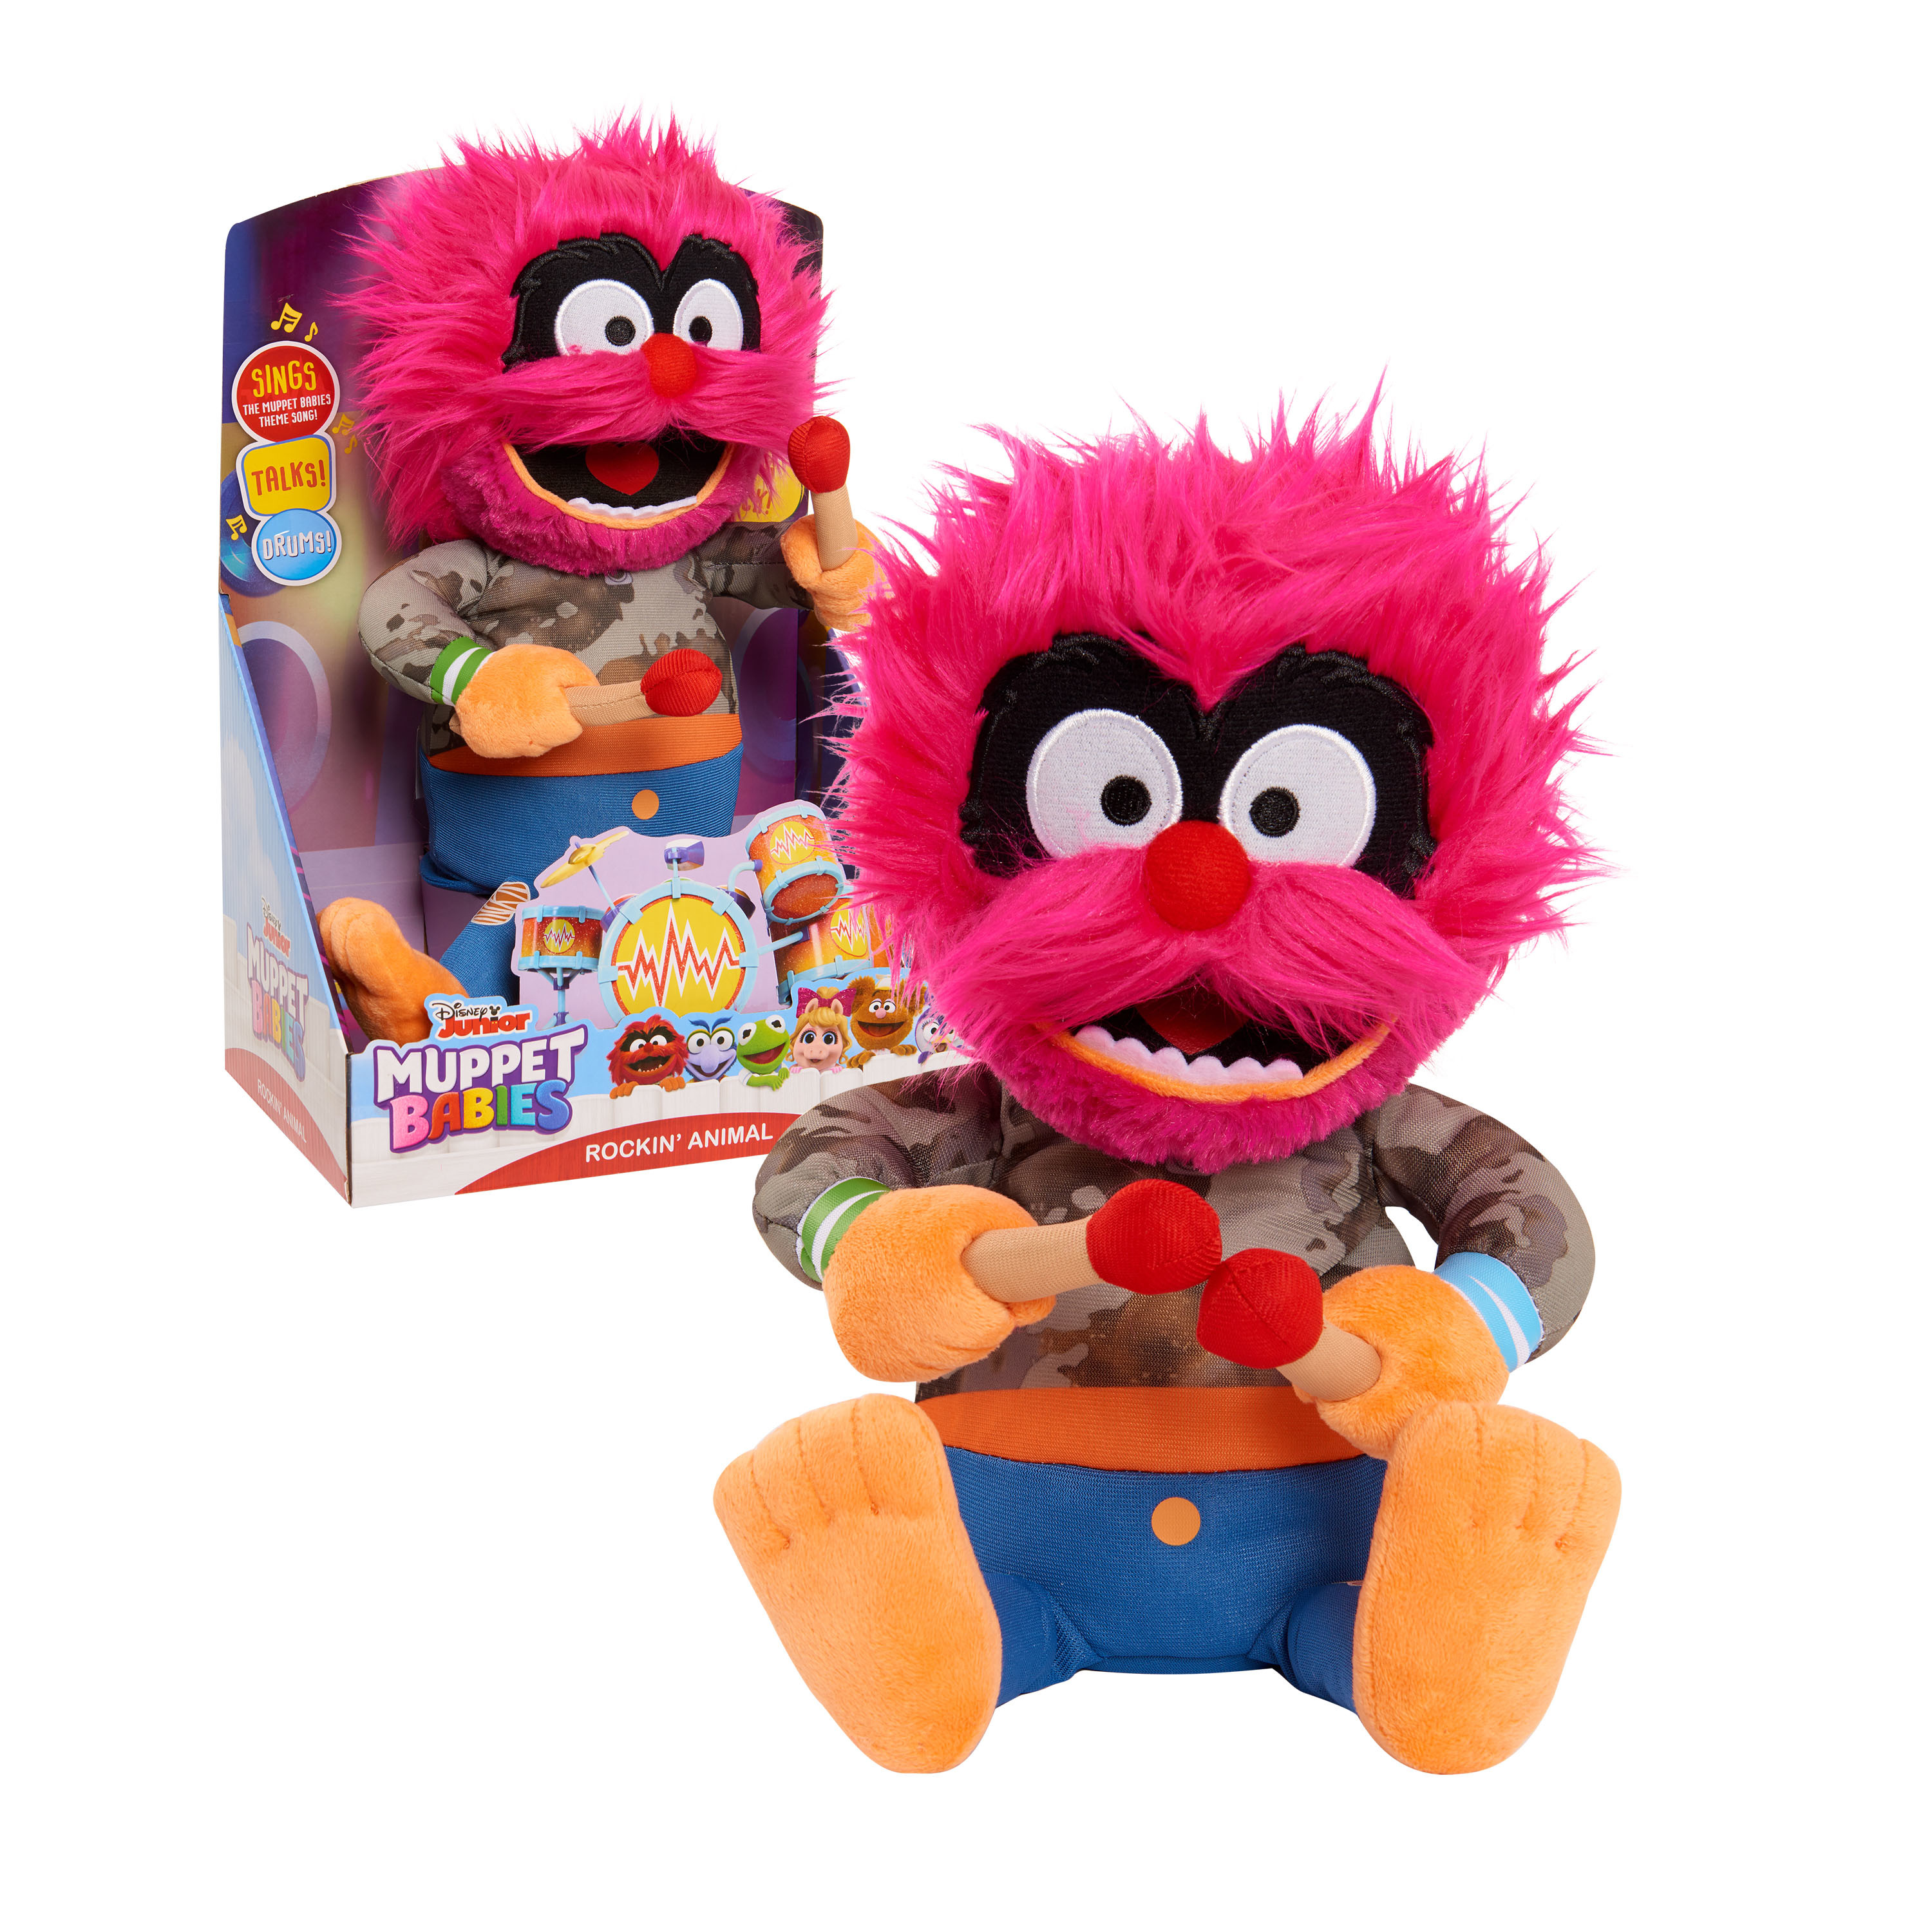 Muppet Babies Rockin' Animal Animated Plush, Officially Licensed Kids Toys for Ages 3 Up, Gifts and Presents - image 1 of 3